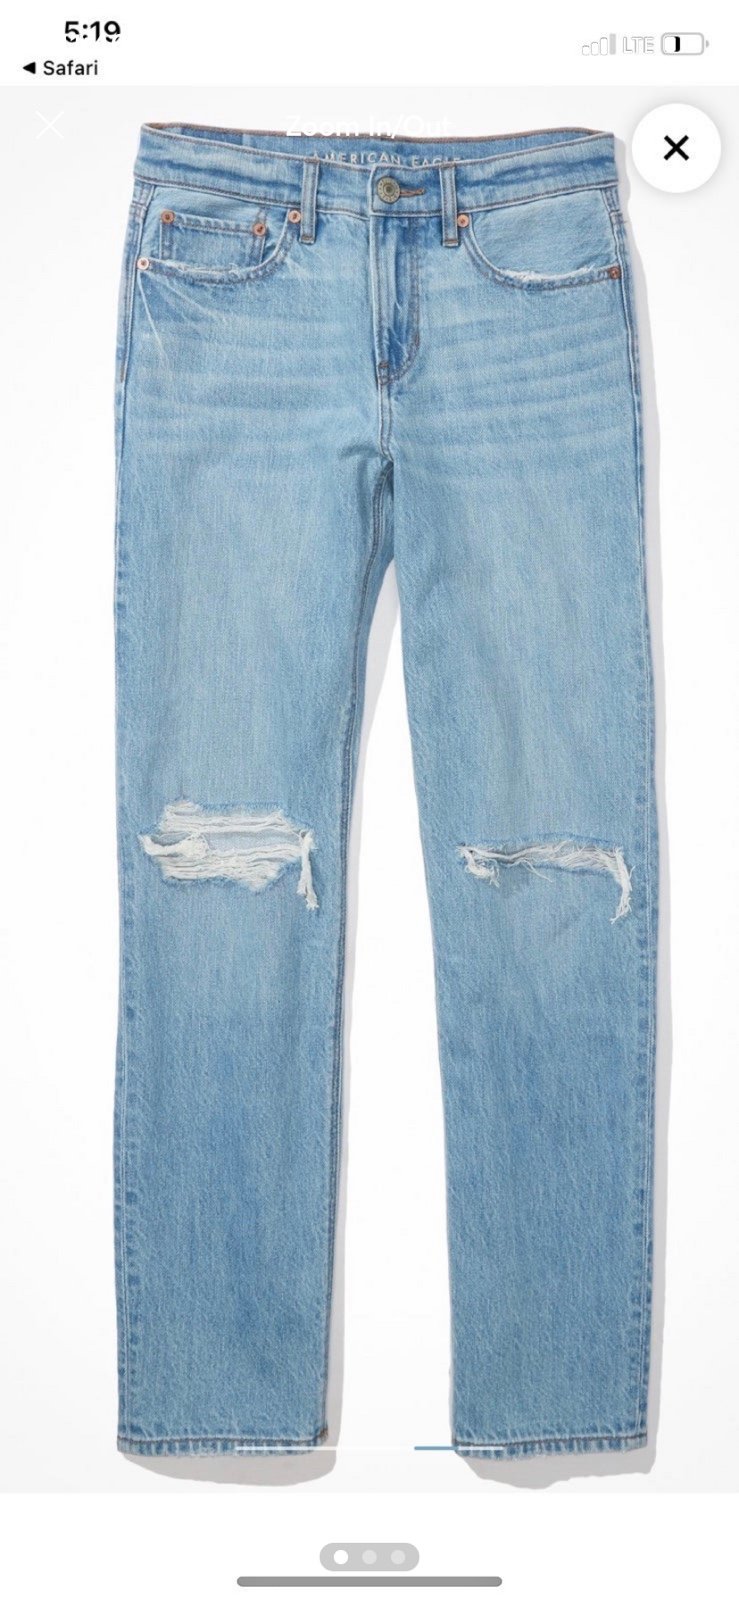 Promotions  American eagle Jeans o4BX0s3u7 New Style